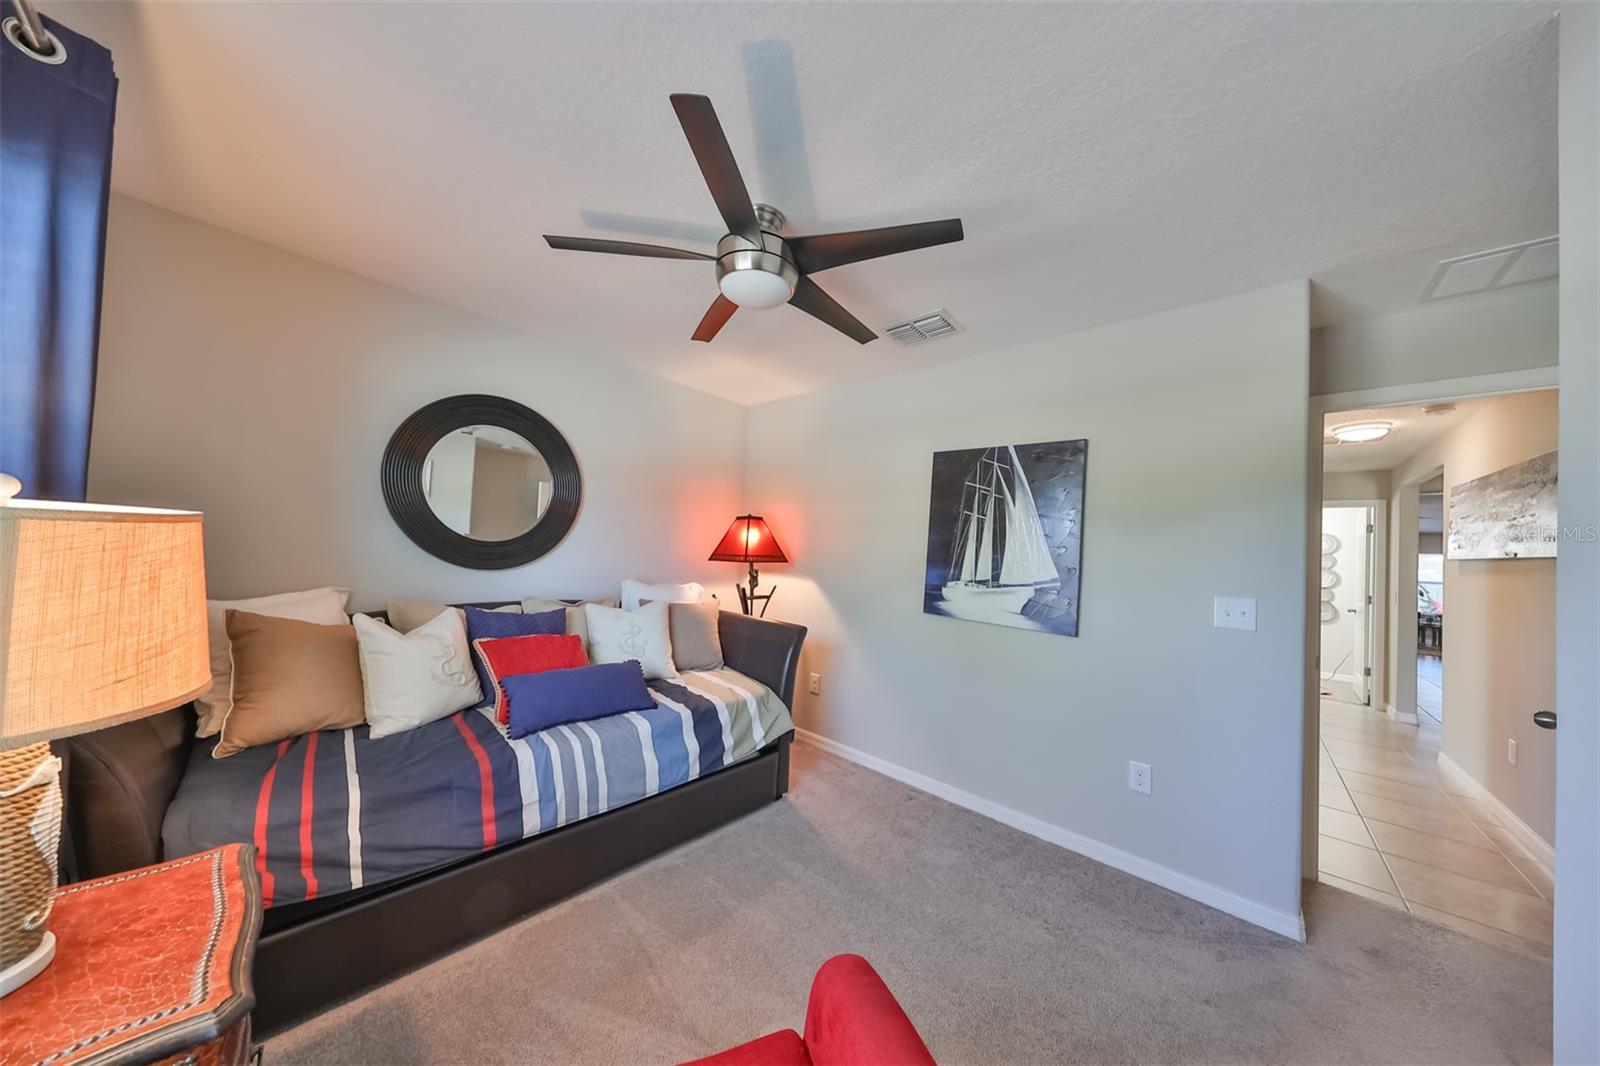 Due to the split floor plan, this room offers lots of privacy.